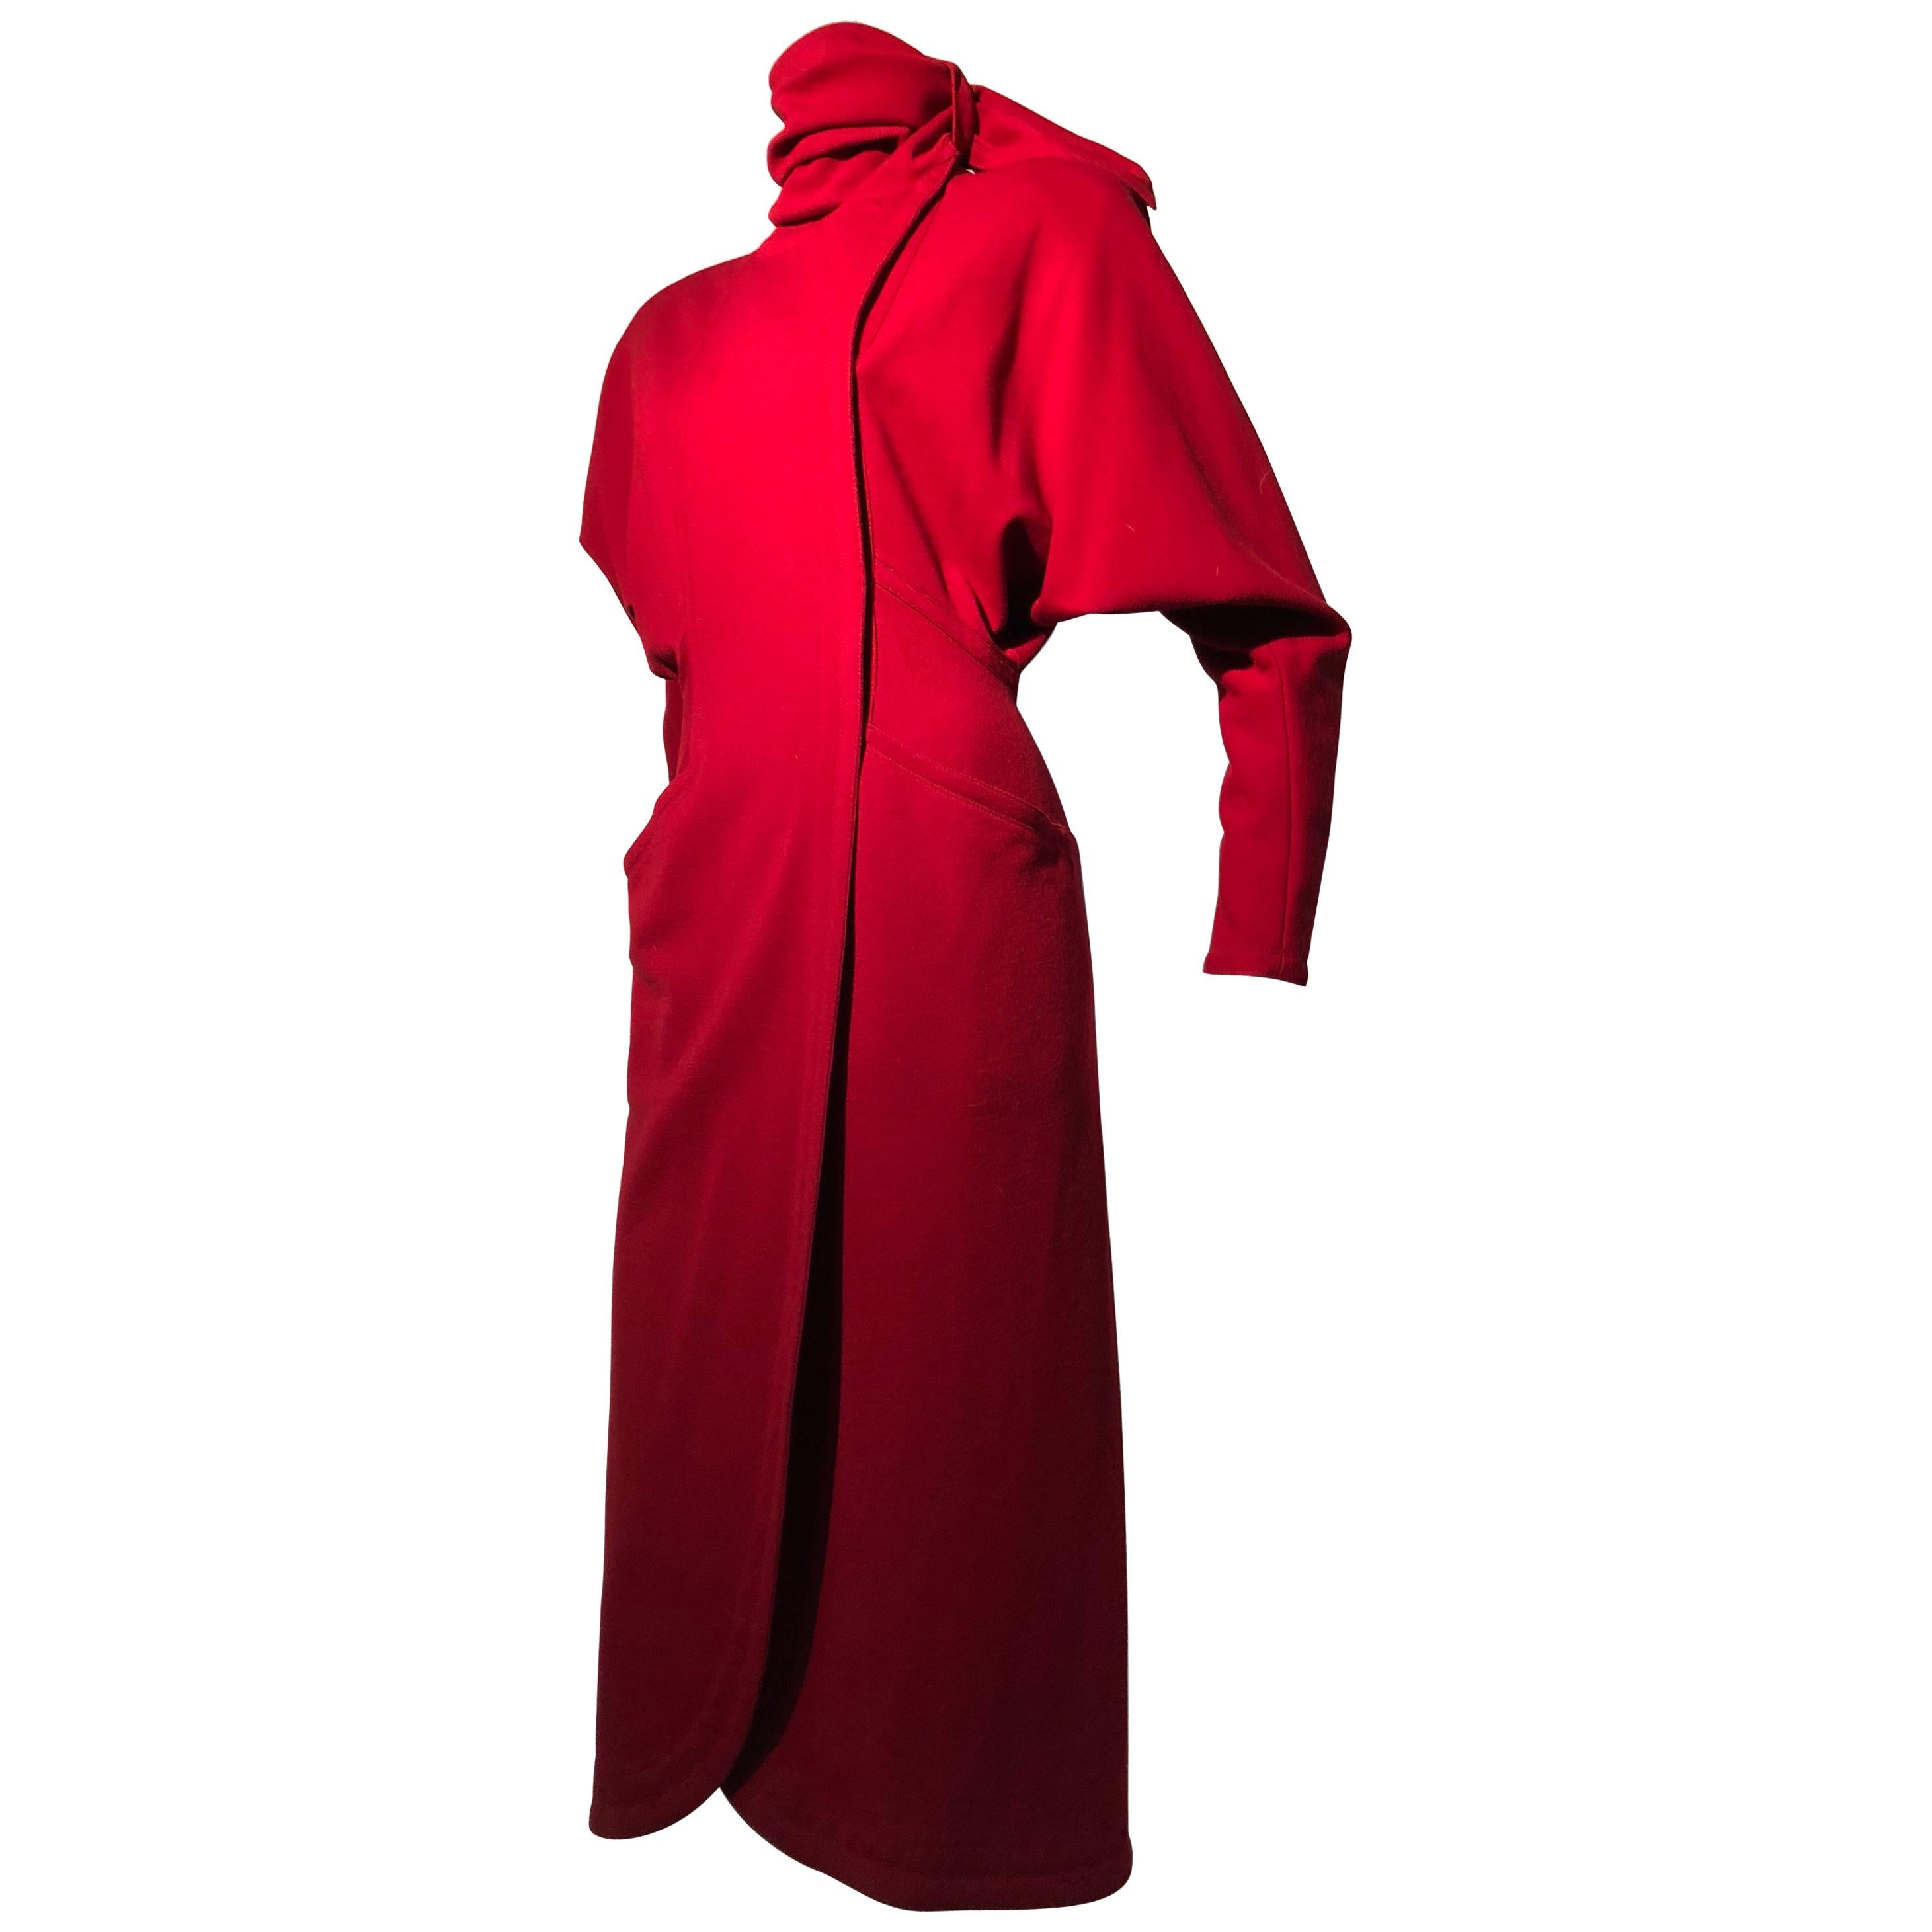 1980s Gianni Versace Vivid Red Wool Wrap-Style Coat Dress W/ Attached Foulard For Sale